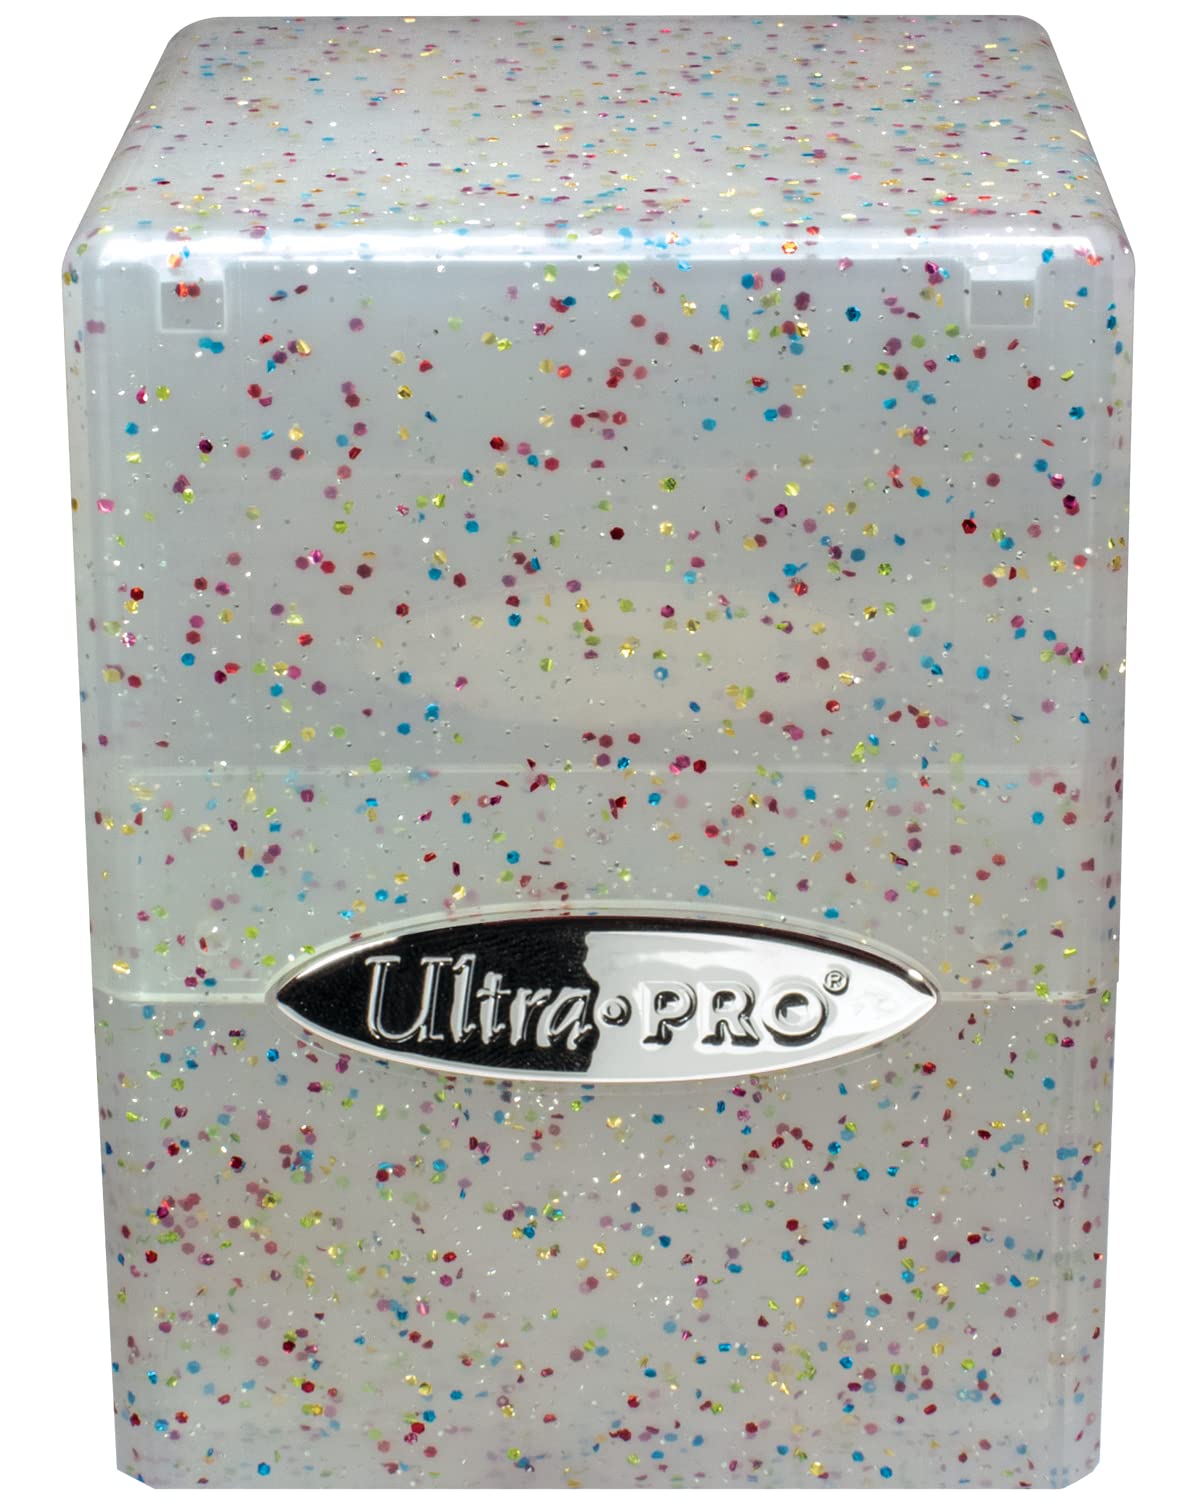 Ultra Pro - Satin Cube 100+ Card Deck Box (Glitter Crystal) - Protect Your Gaming Cards, Sports Cards or Collectible Cards In Stylish Glitter Deck Box, Perfect for Safe Traveling